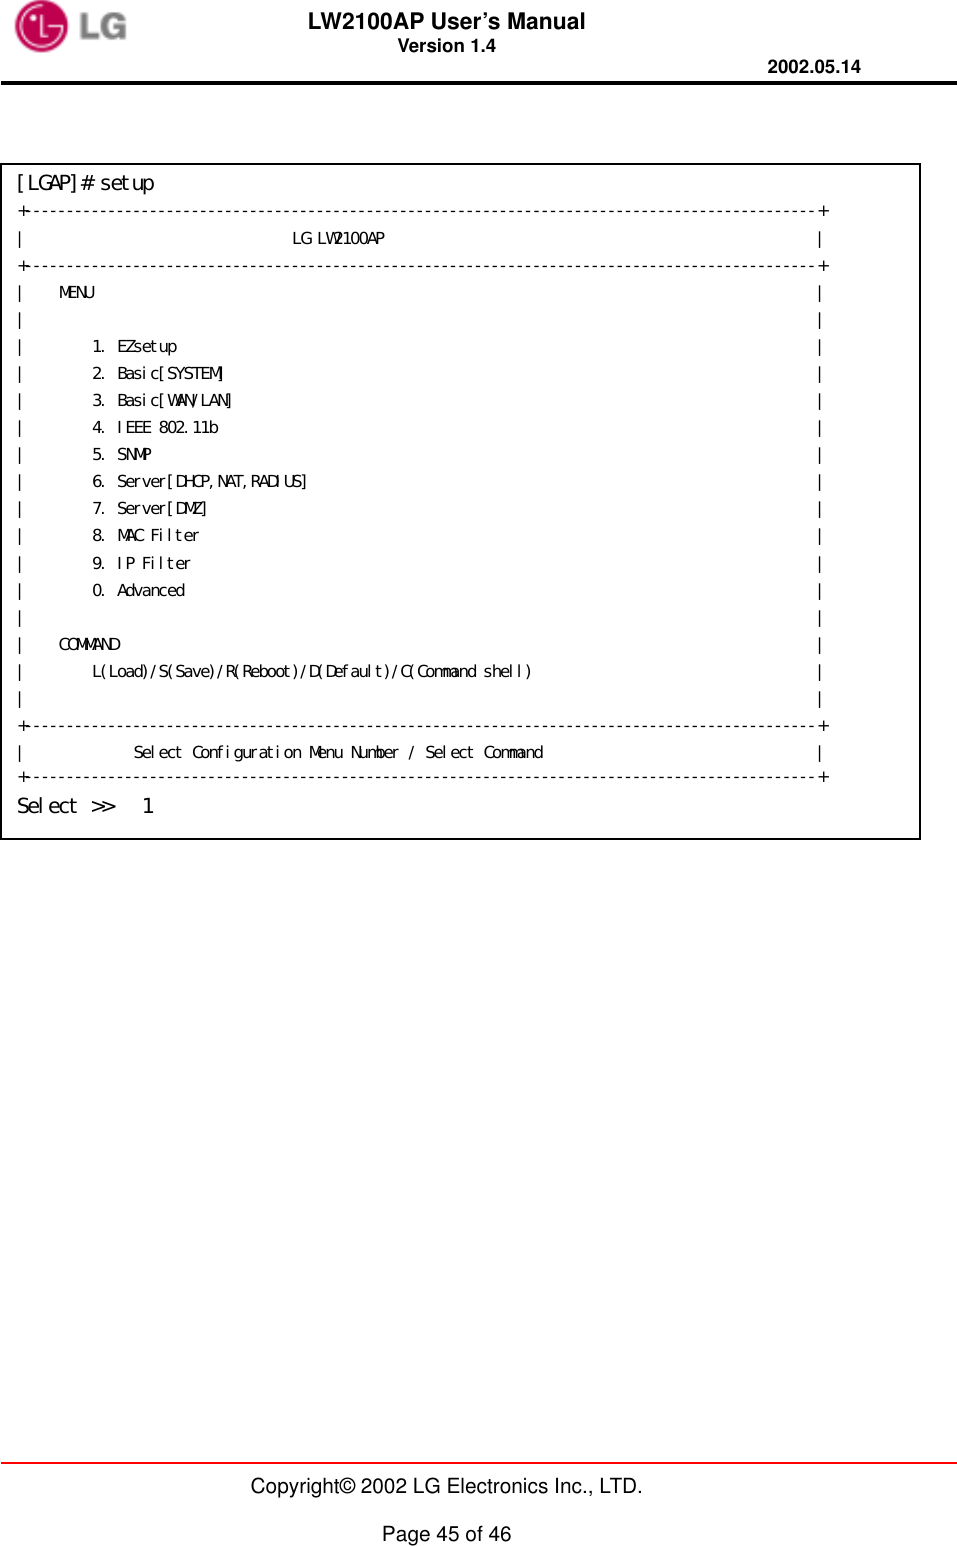 LW2100AP User’s Manual Version 1.4 2002.05.14   Copyright© 2002 LG Electronics Inc., LTD.  Page 45 of 46                  [LGAP]# setup +----------------------------------------------------------------+ |                               LG Access Point                               | +---------------------------------------------------------------+ |                                                                             | |        View Configuration                                                   | |                                                                             | |        1. SYSTEM                                                           | |        2. WAN                                                              | |        3. Wireless LAN &amp; LAN                                                 | |        5. IEEE 802.11b                                                     | |        6. RADIUS                                                          | |        7. DHCP &amp; NAT                                                     | |        8. SNMP                                                           | |        9. Filter(IP &amp; MAC)                                                  | |        0. etc.                                                              | |        S. Set Configuration                                                 | |        Q. exit                                                              | +---------------------------------------------------------------+ |                       Select Configuration Menu...                          | +---------------------------------------------------------------+ Select &gt;&gt;   1 [LGAP]# setup +-----------------------------------------------------------------------------------------------+ |                                LG LW2100AP                                                    | +-----------------------------------------------------------------------------------------------+ |    MENU                                                                                       | |                                                                                               | |        1. EZsetup                                                                             | |        2. Basic[SYSTEM]                                                                       | |        3. Basic[WAN/LAN]                                                                      | |        4. IEEE 802.11b                                                                        | |        5. SNMP                                                                                | |        6. Server[DHCP,NAT,RADIUS]                                                             | |        7. Server[DMZ]                                                                         | |        8. MAC Filter                                                                          | |        9. IP Filter                                                                           | |        0. Advanced                                                                            | |                                                                                               | |    COMMAND                                                                                    | |        L(Load)/S(Save)/R(Reboot)/D(Default)/C(Command shell)                                  | |                                                                                               | +-----------------------------------------------------------------------------------------------+ |             Select Configuration Menu Number / Select Command                                 | +-----------------------------------------------------------------------------------------------+ Select &gt;&gt;   1 